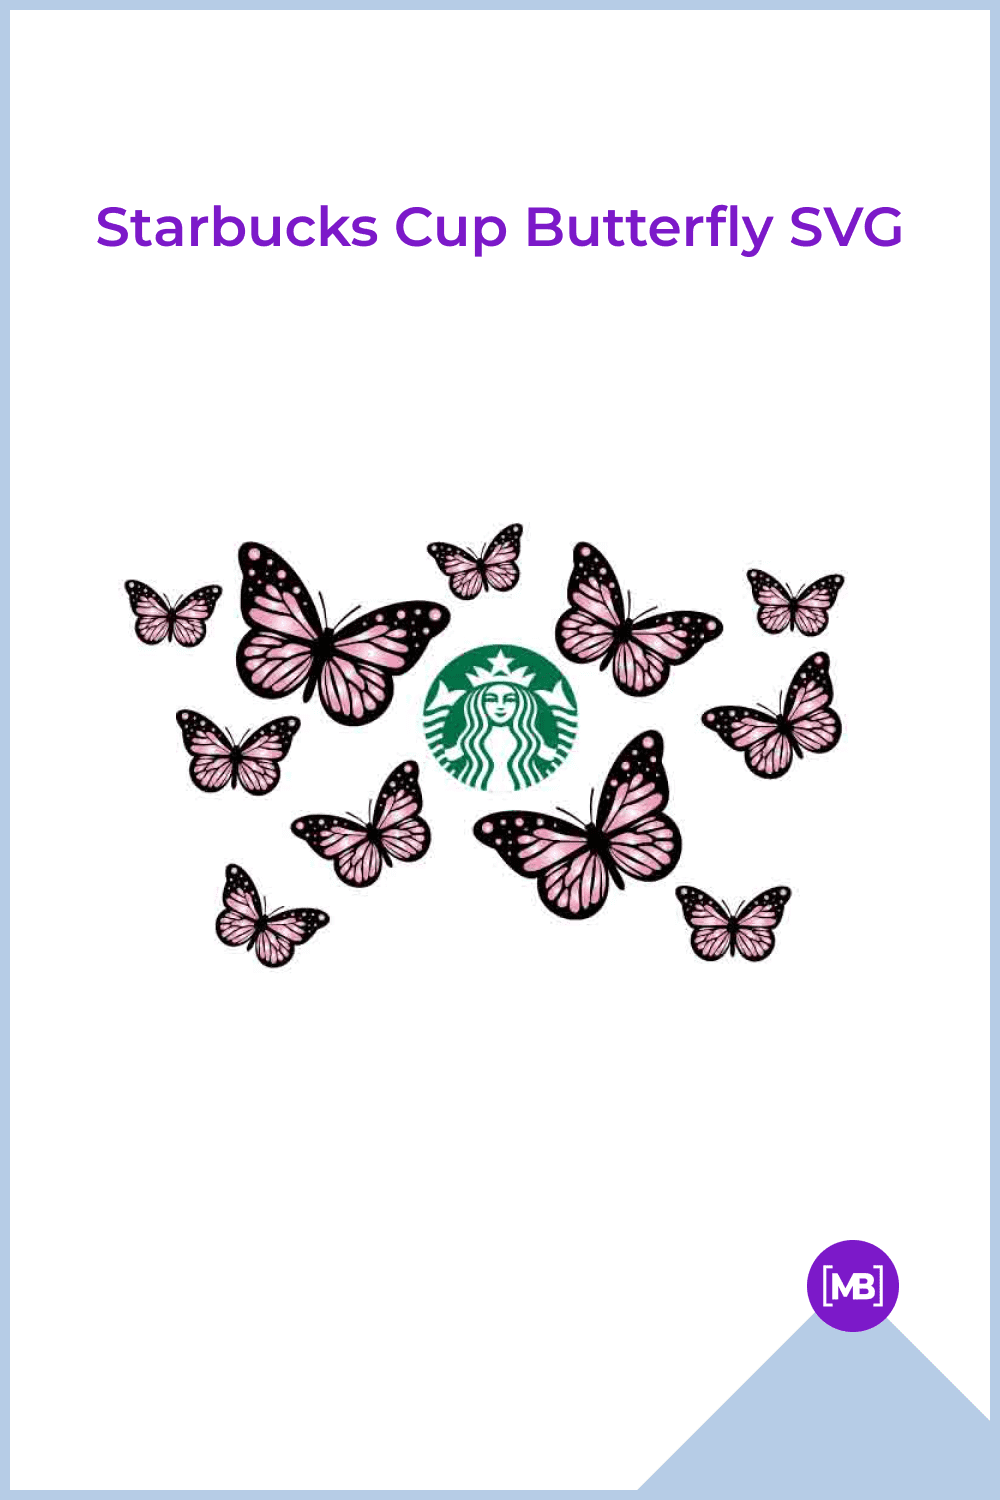 Starbucks Cup Butterfly SVG.